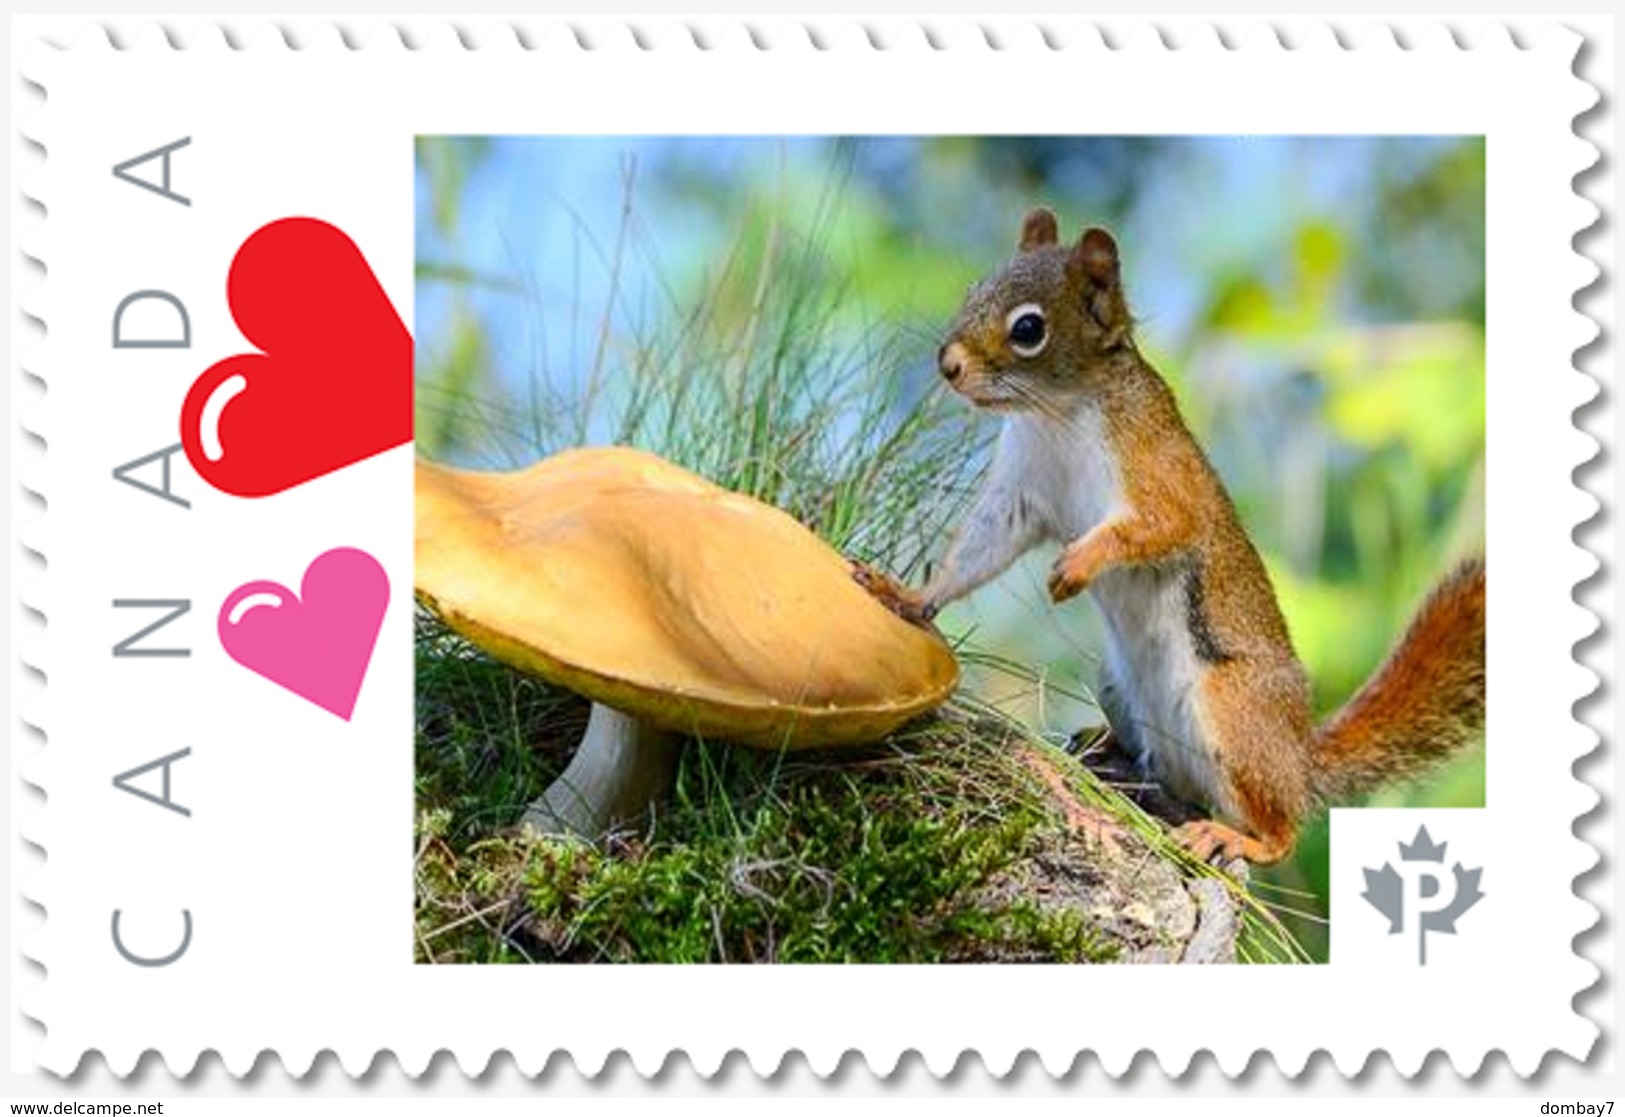 SQUIRREL And MUSHROOM = Picture Postage MNH-VF+ Canada 2019 [p19-04s10] - Mushrooms